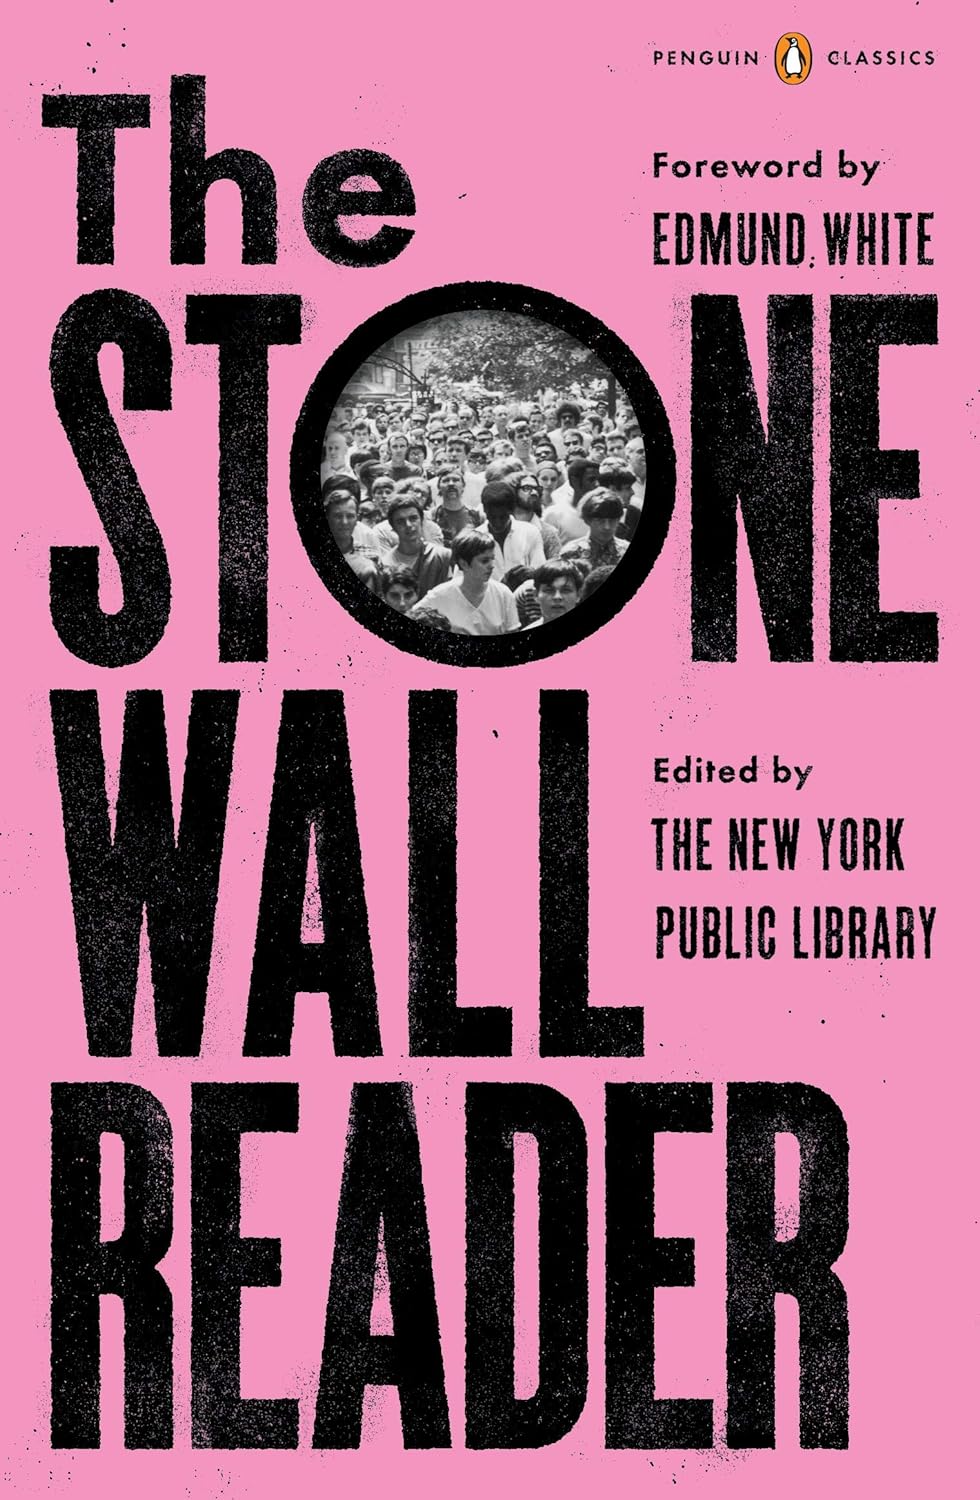 The book cover for The Stonewall Reader is bright pink with the title written in black text. In the O of Stonewall is a black and white image of an American LGBTQ+ crowd protesting